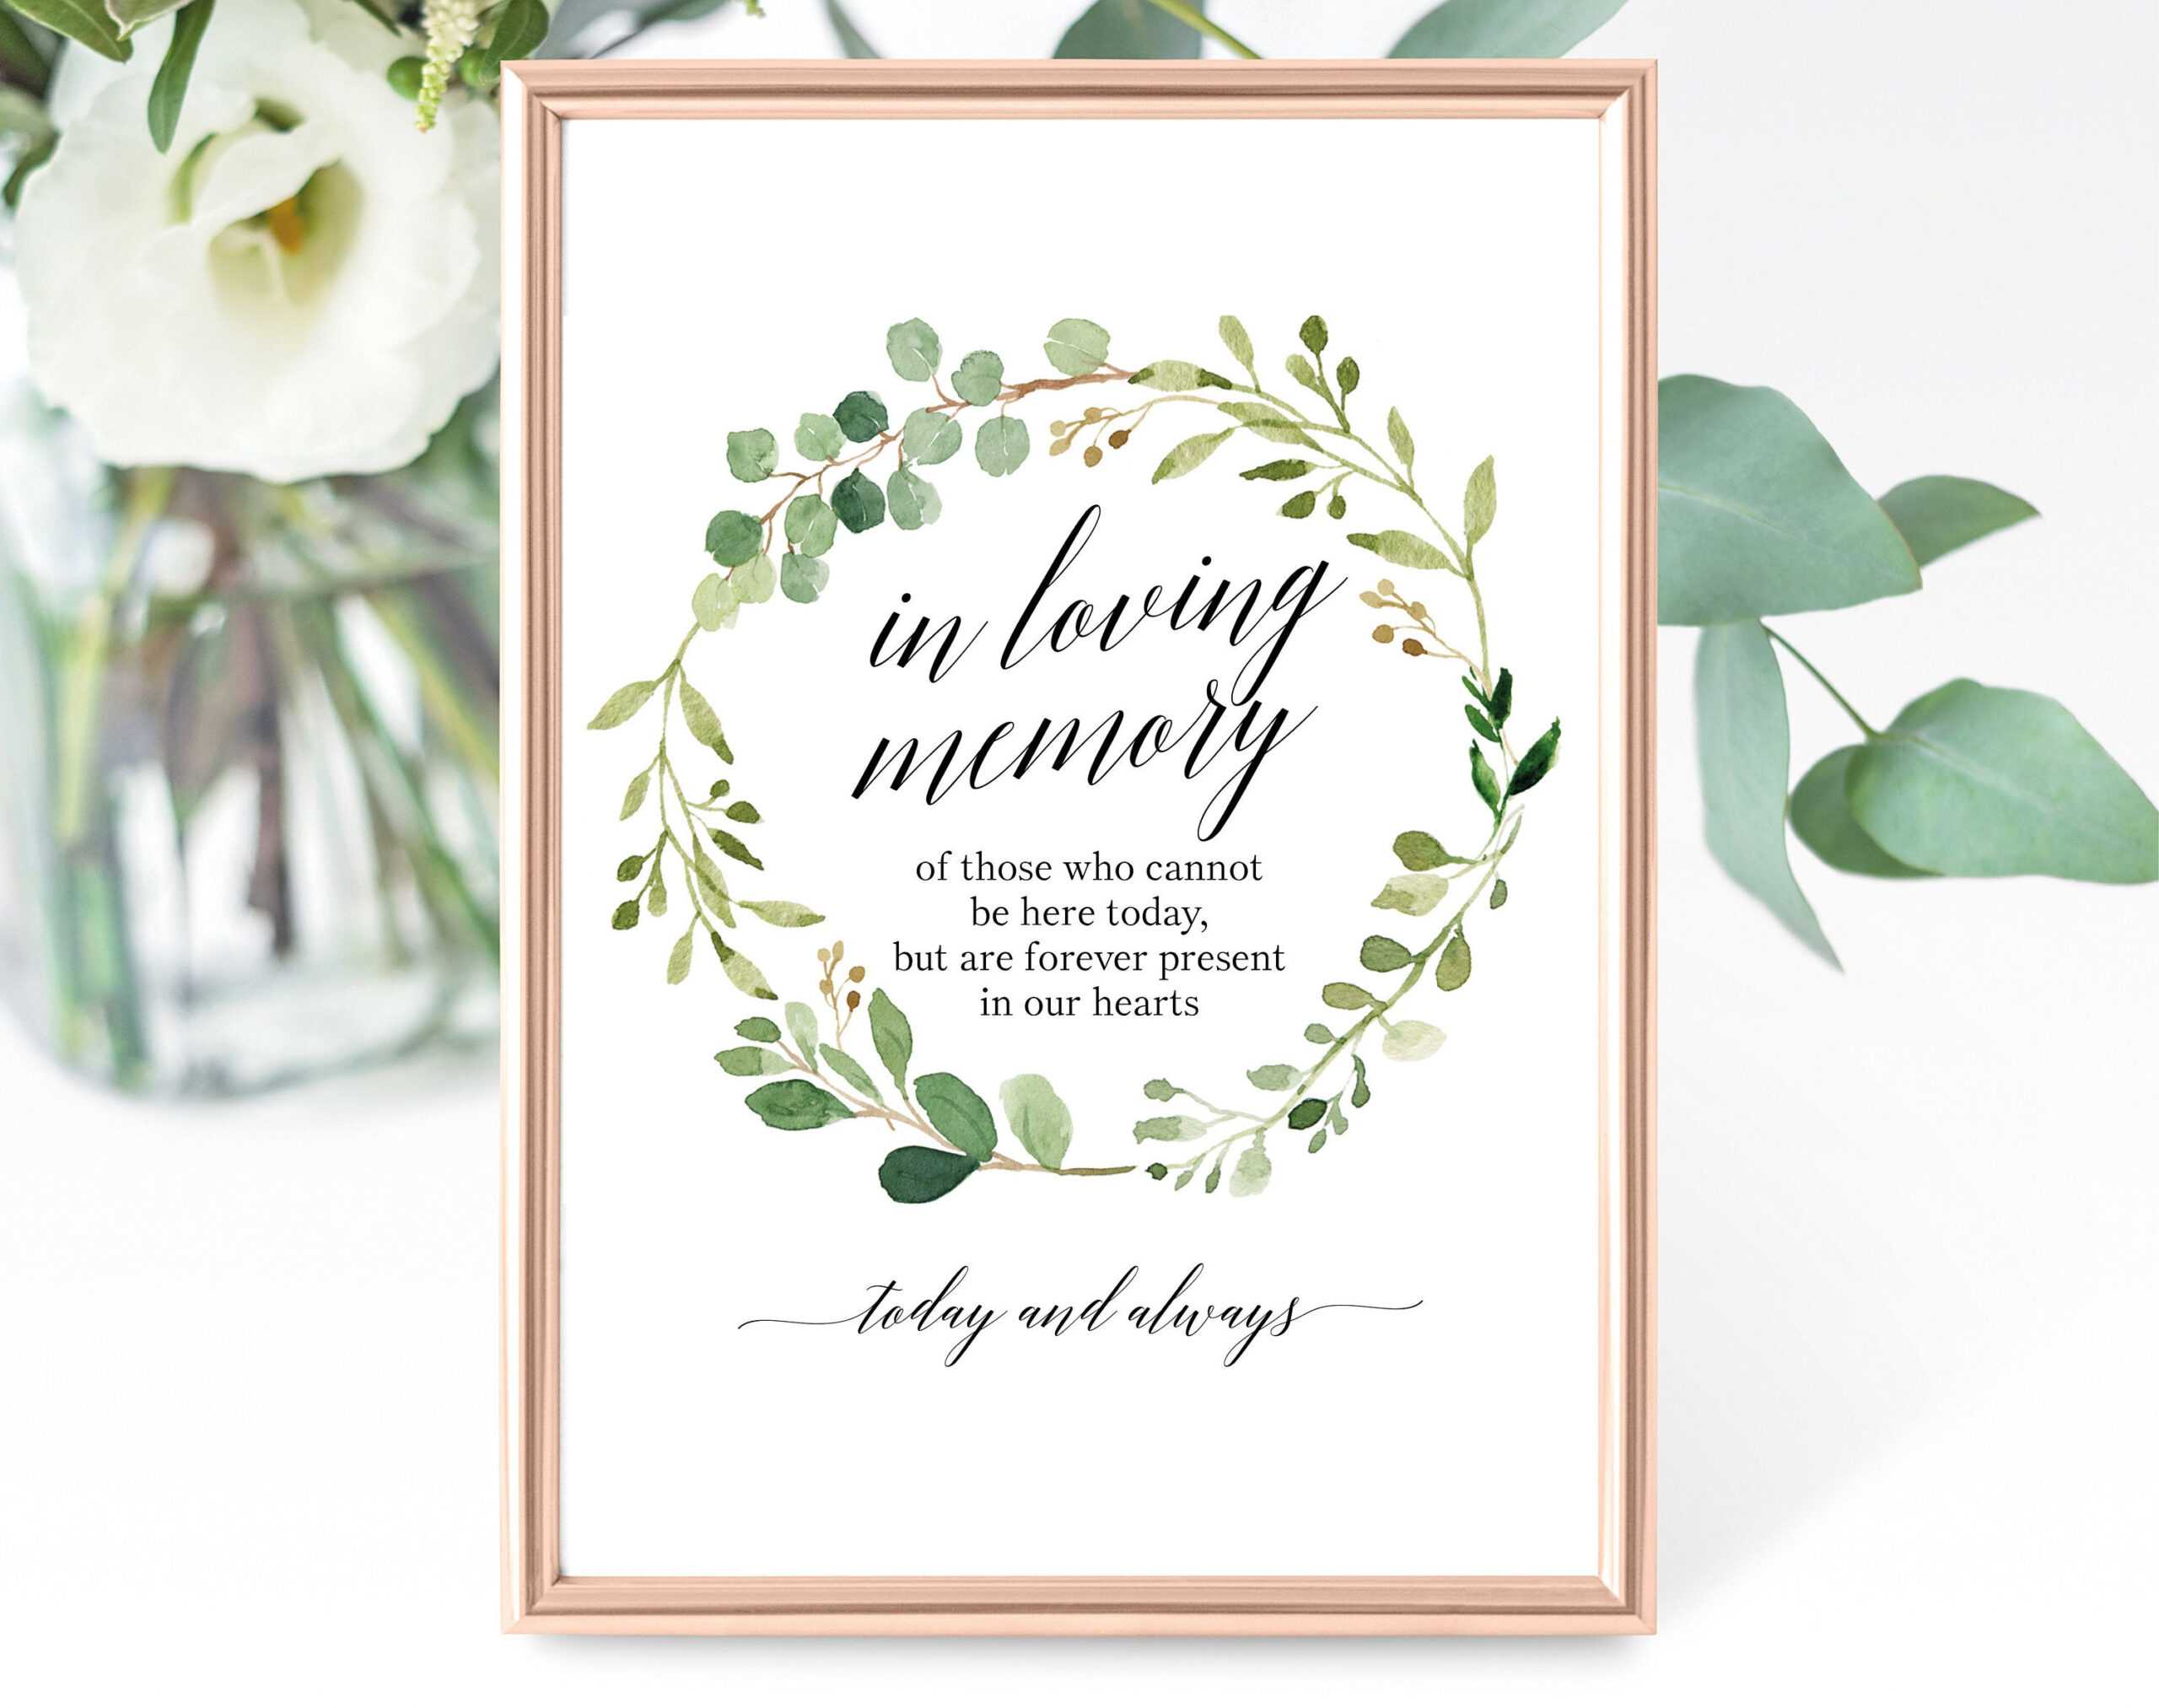 031 Template Ideas In Loving Memory Free Cards Awesome Inside Sympathy Card Template